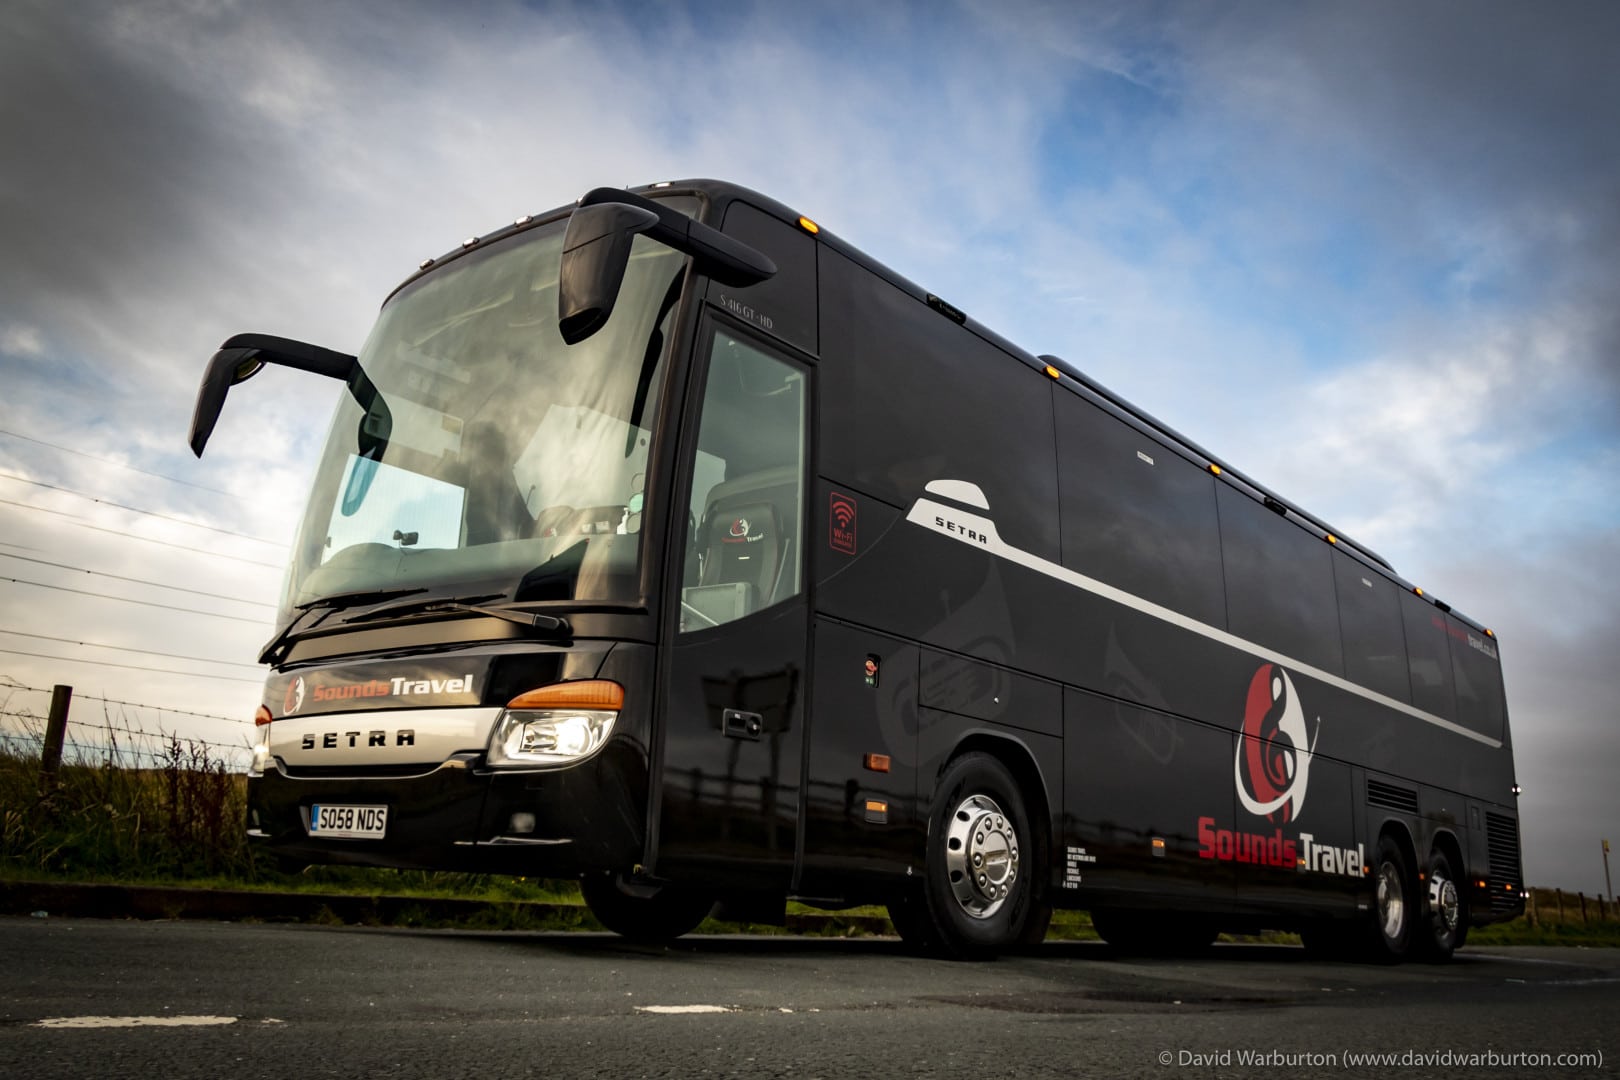 Sounds Travel of Rochdale works with National Coach Network